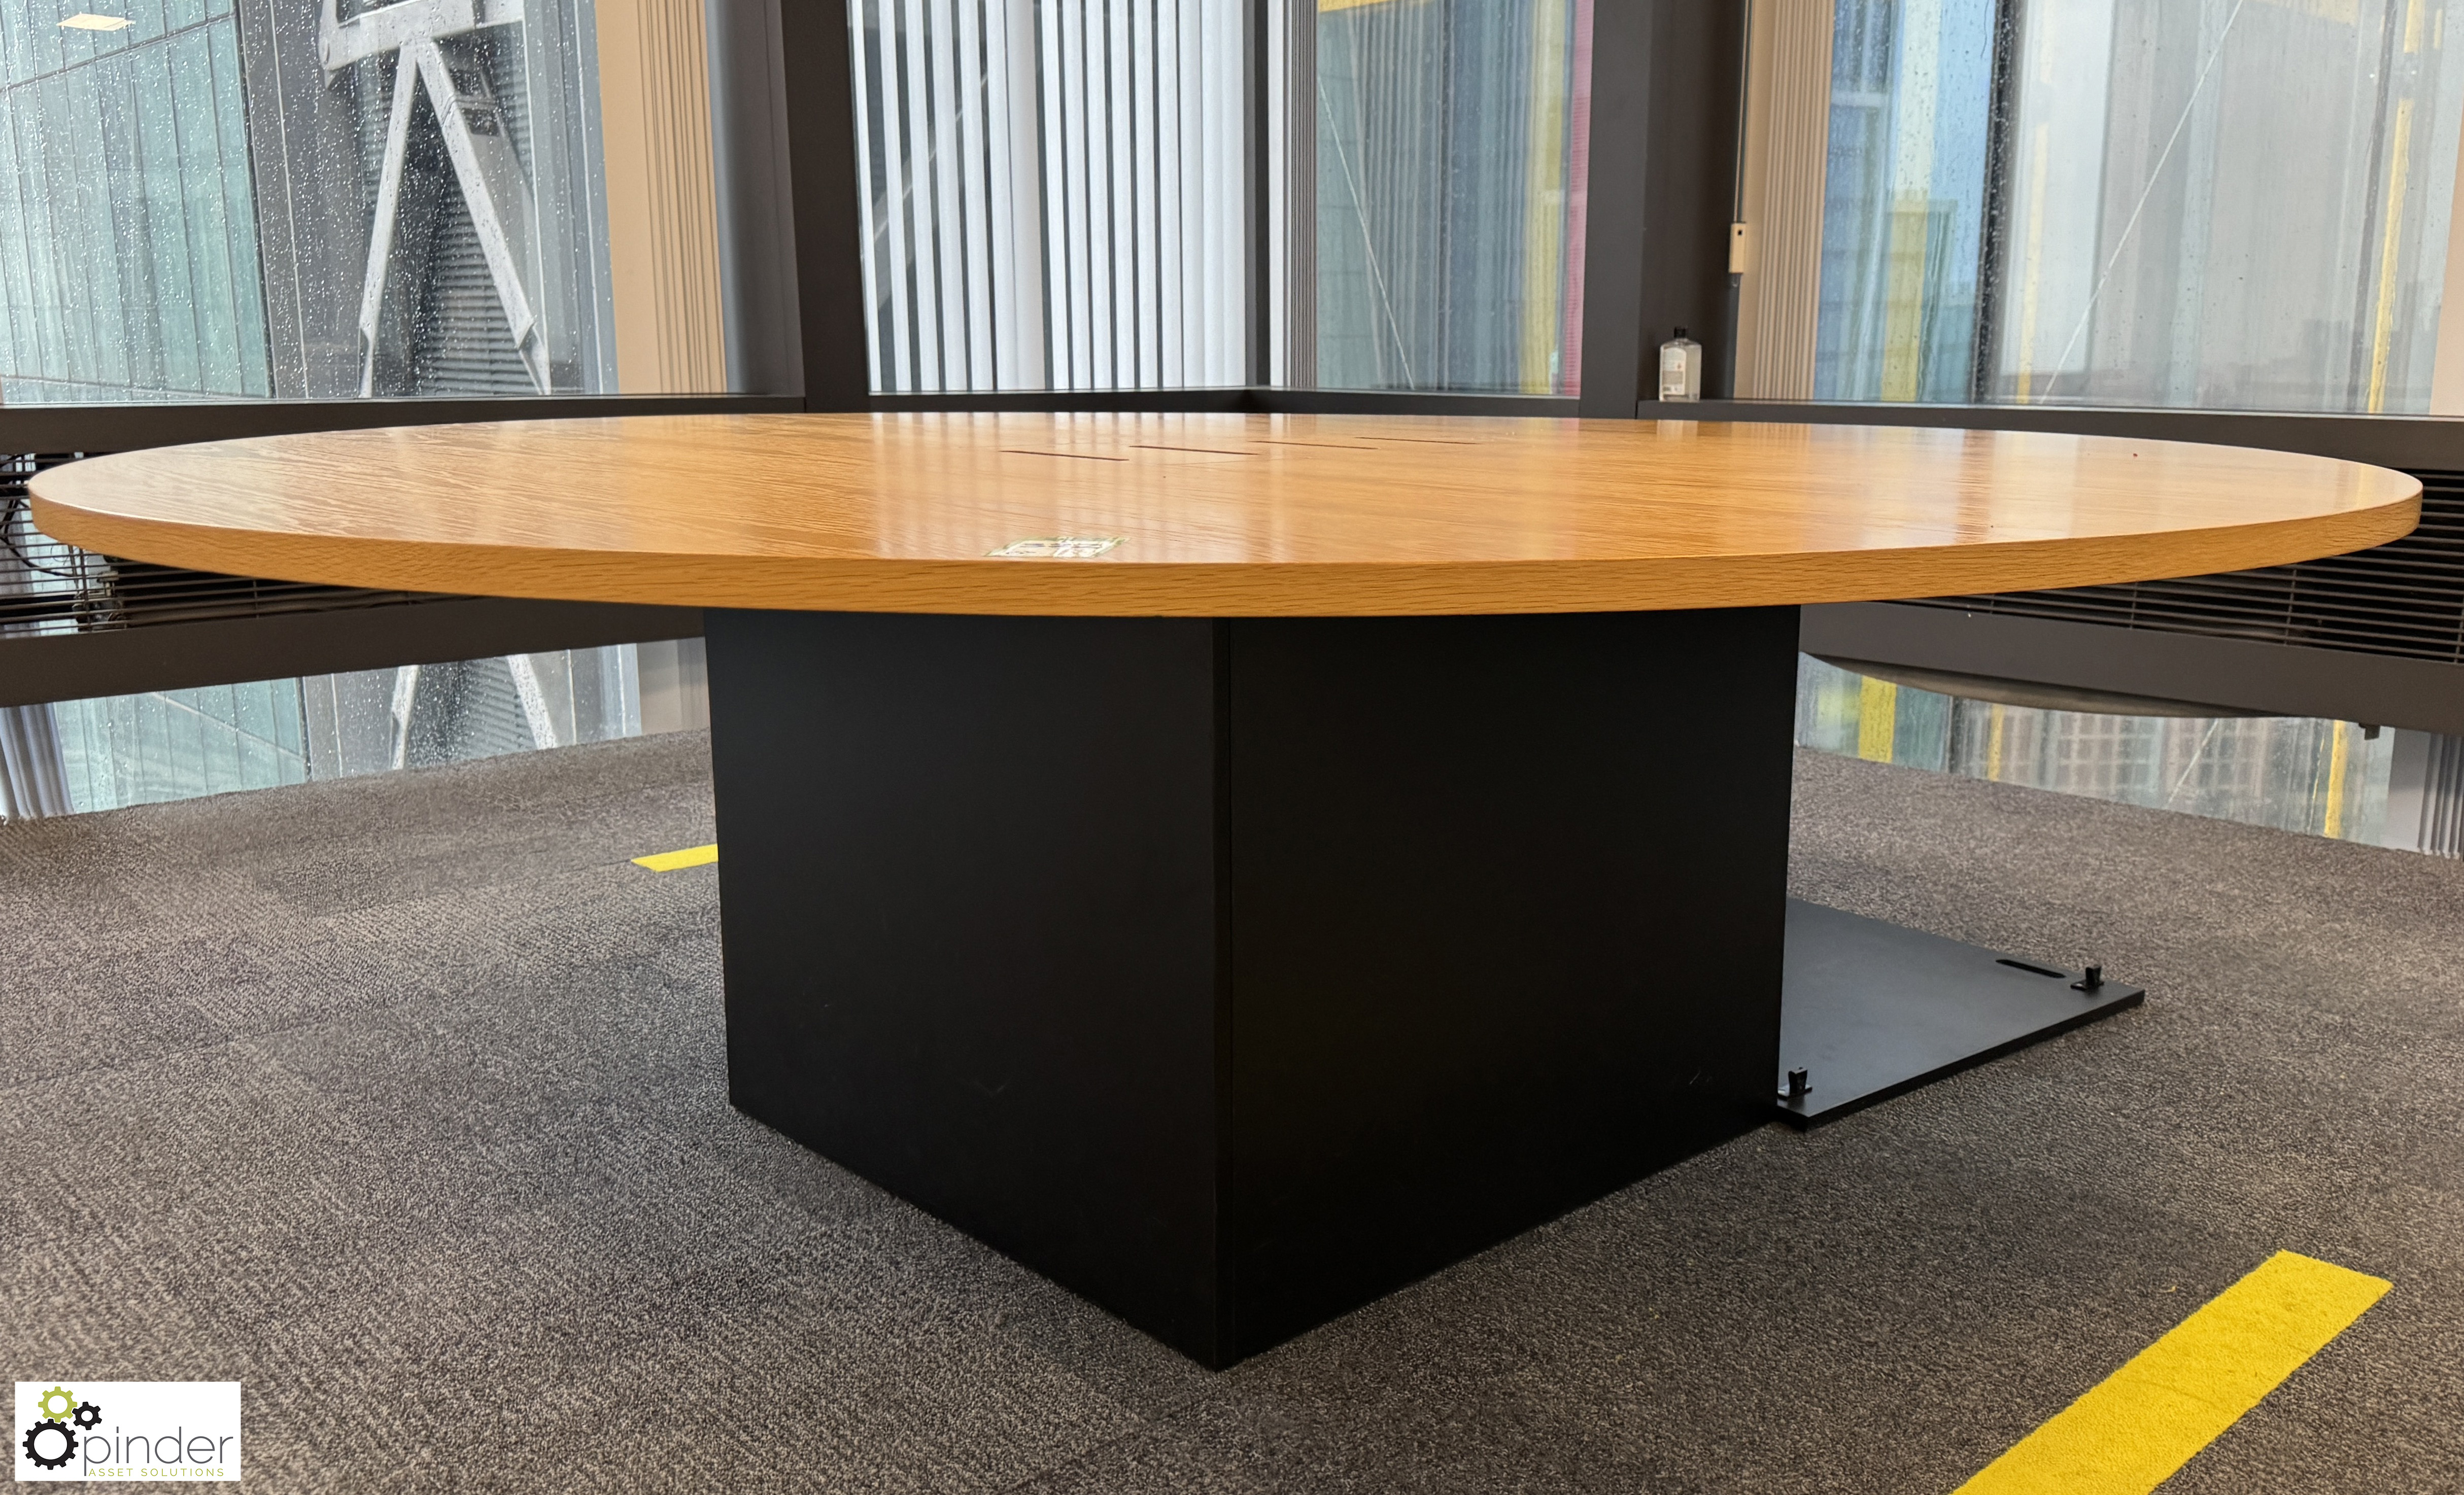 Light oak veneer circular Meeting Table, 2200mm x 750mm, with cable management and base (location in - Image 3 of 7